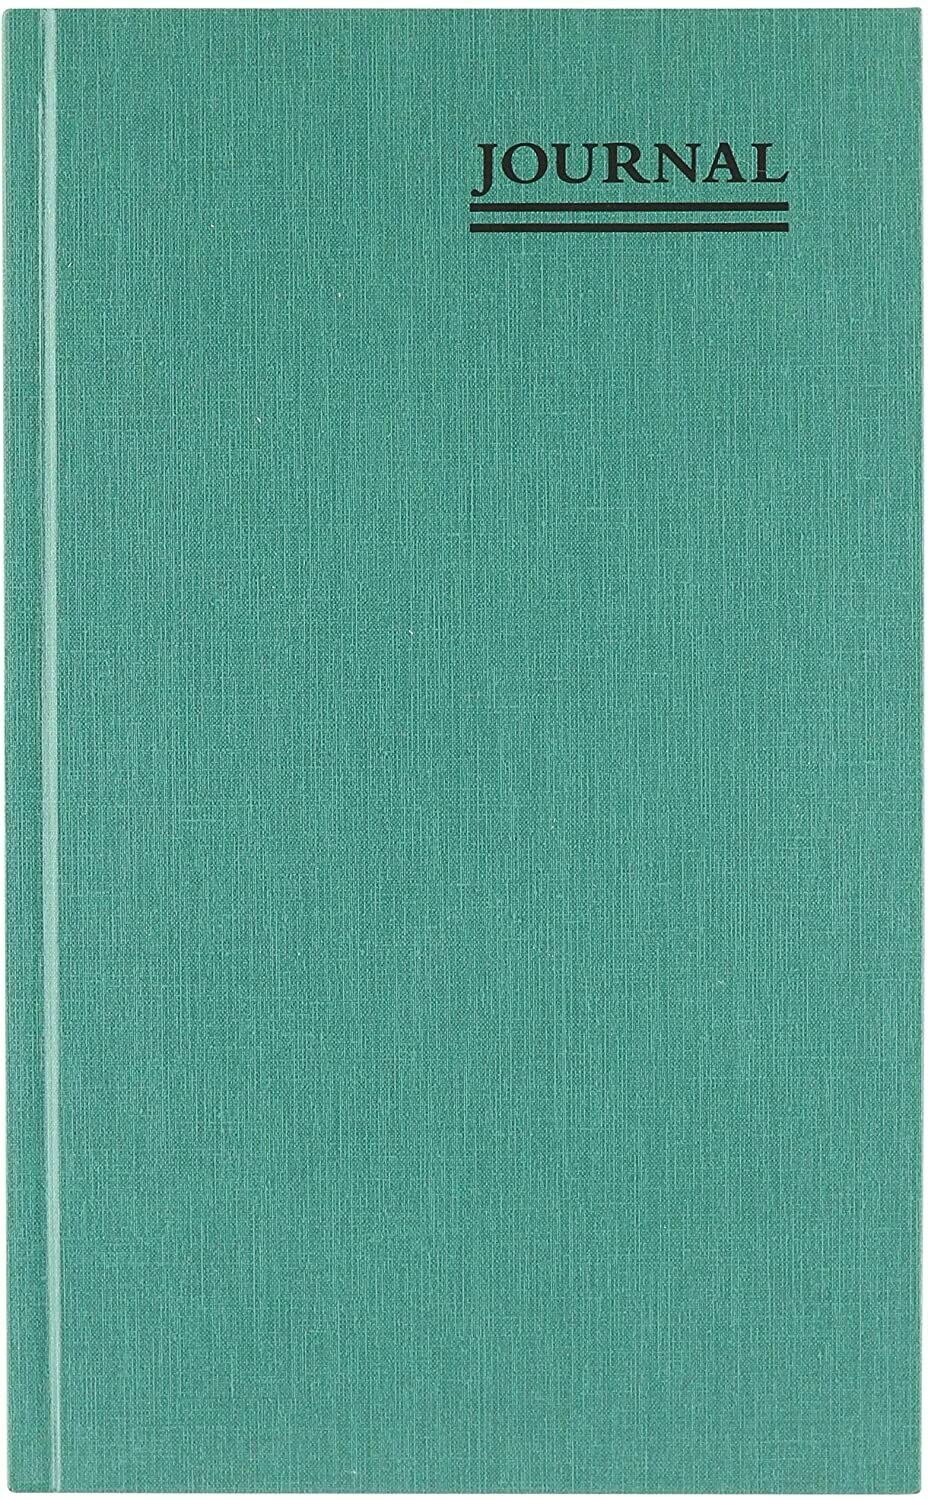 Rediform Emerald Series Hard Cover Journal Book - 150pages